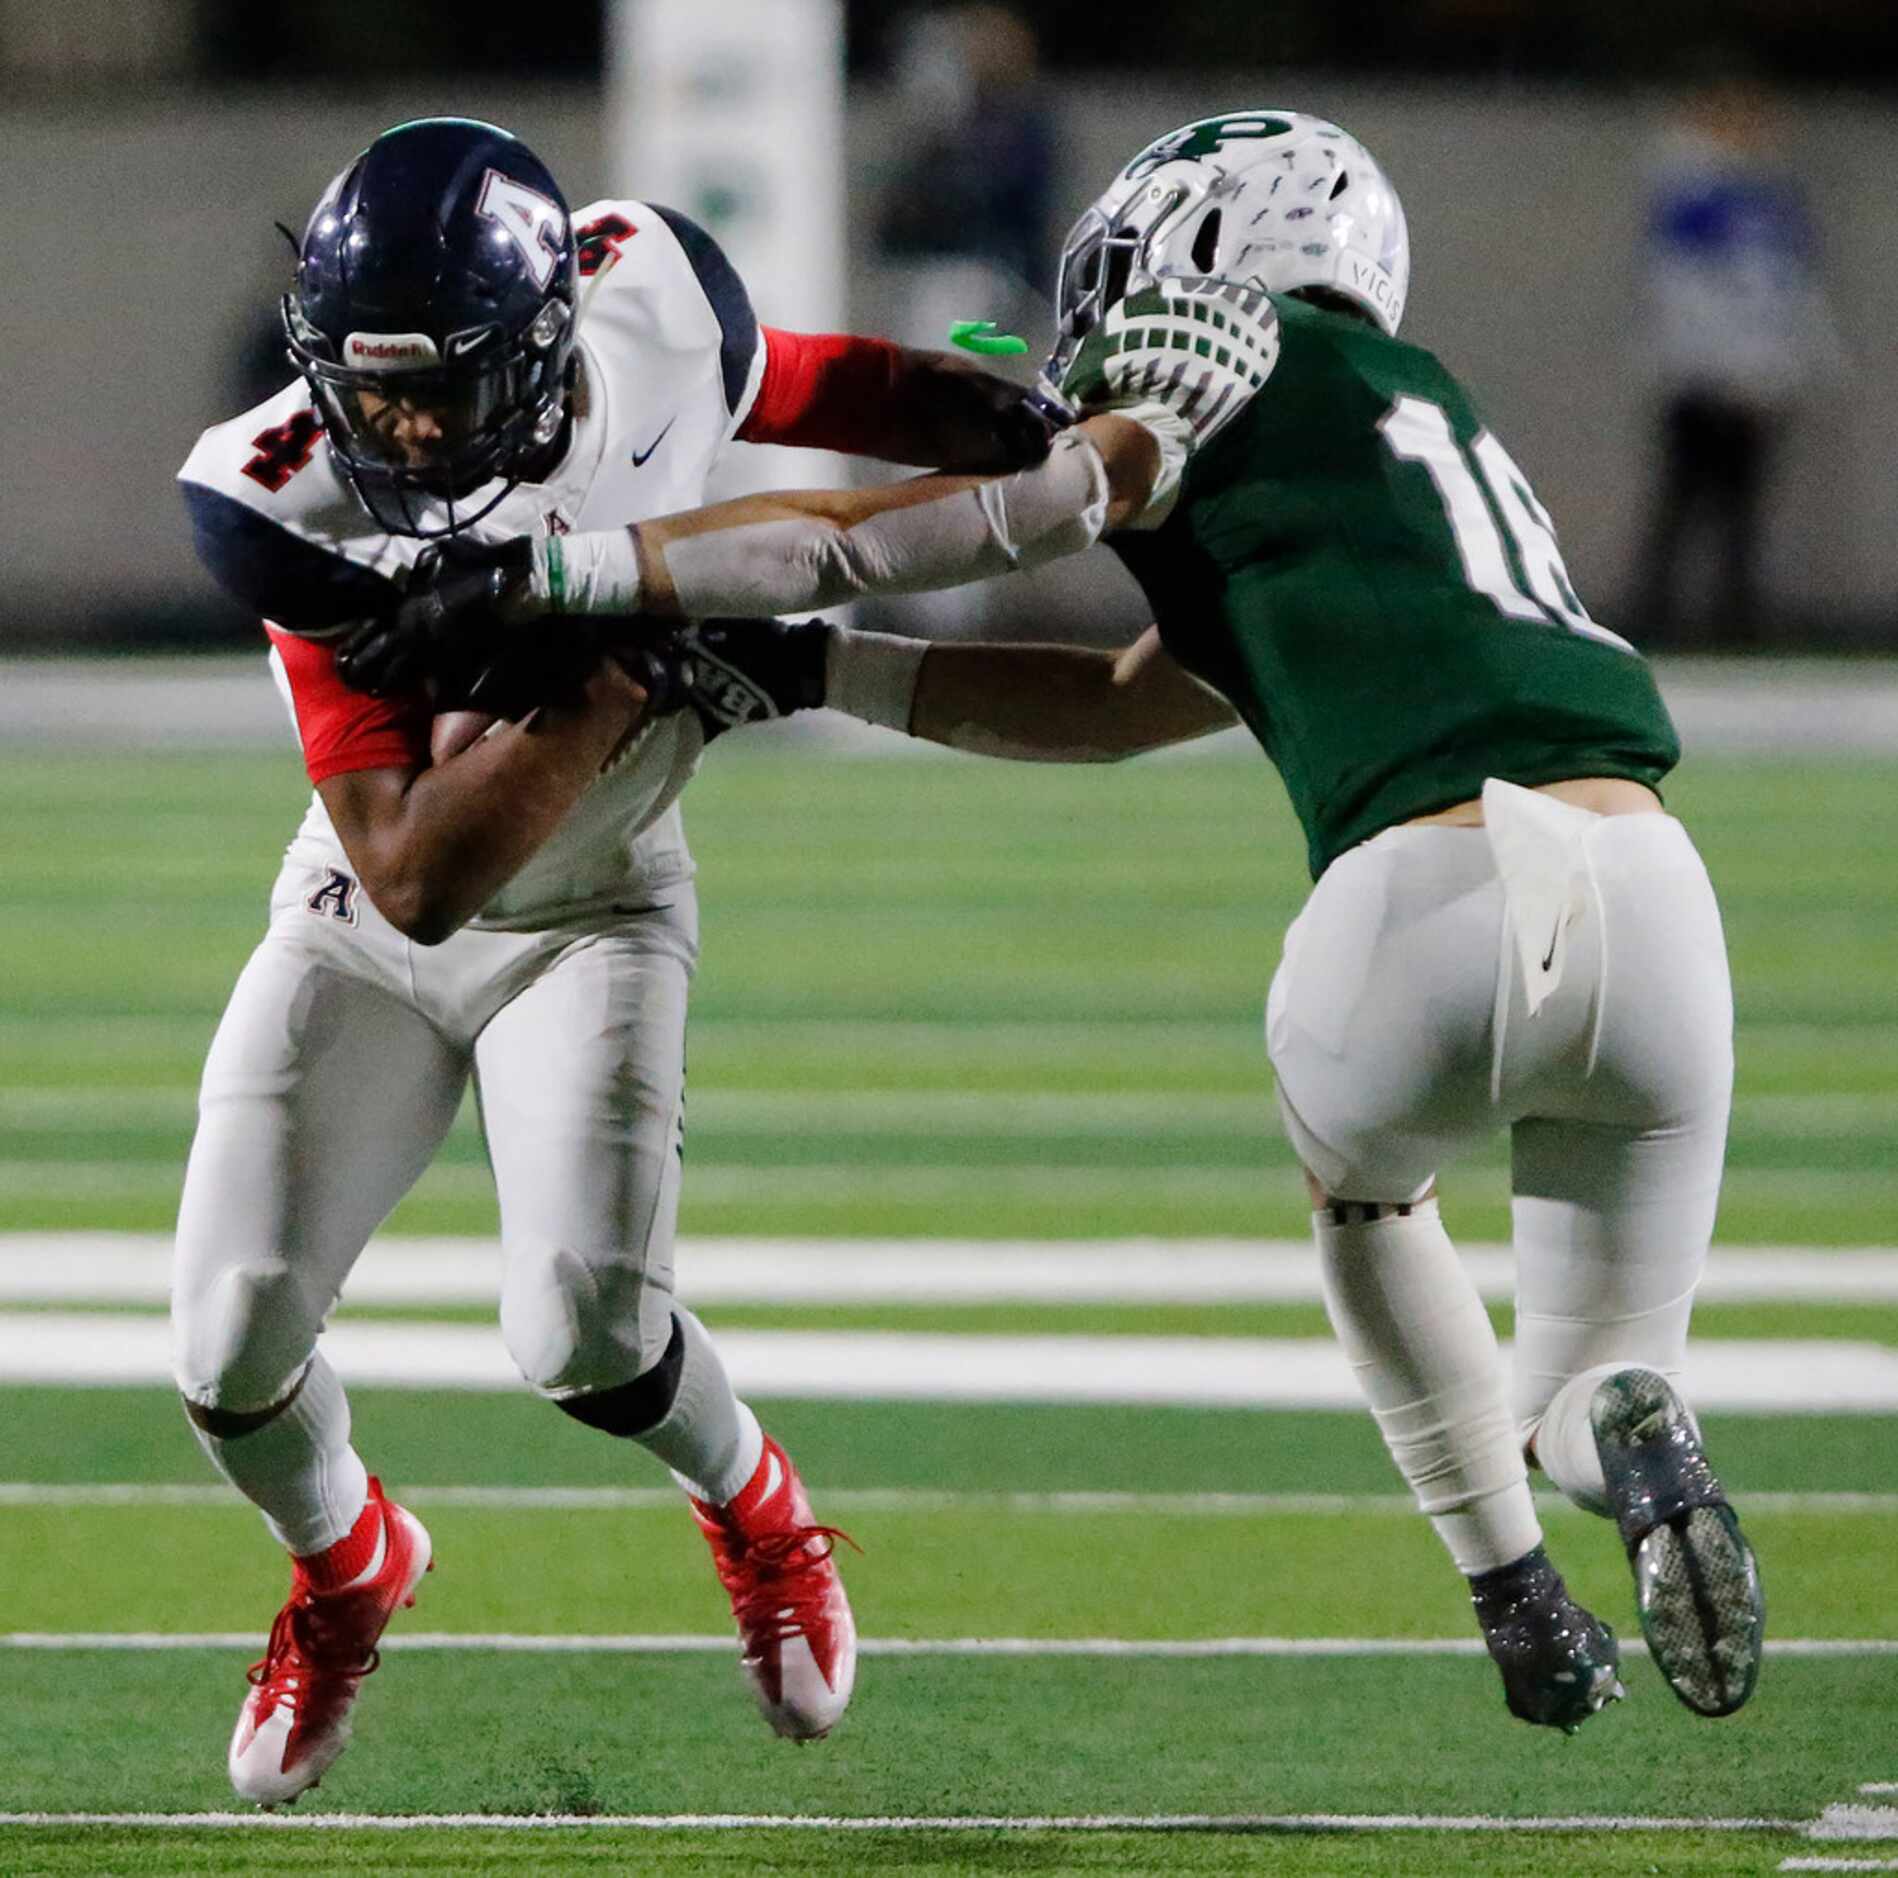 Allen High School wide receiver Darrion Sherfield (4) catches a pass while defended by...